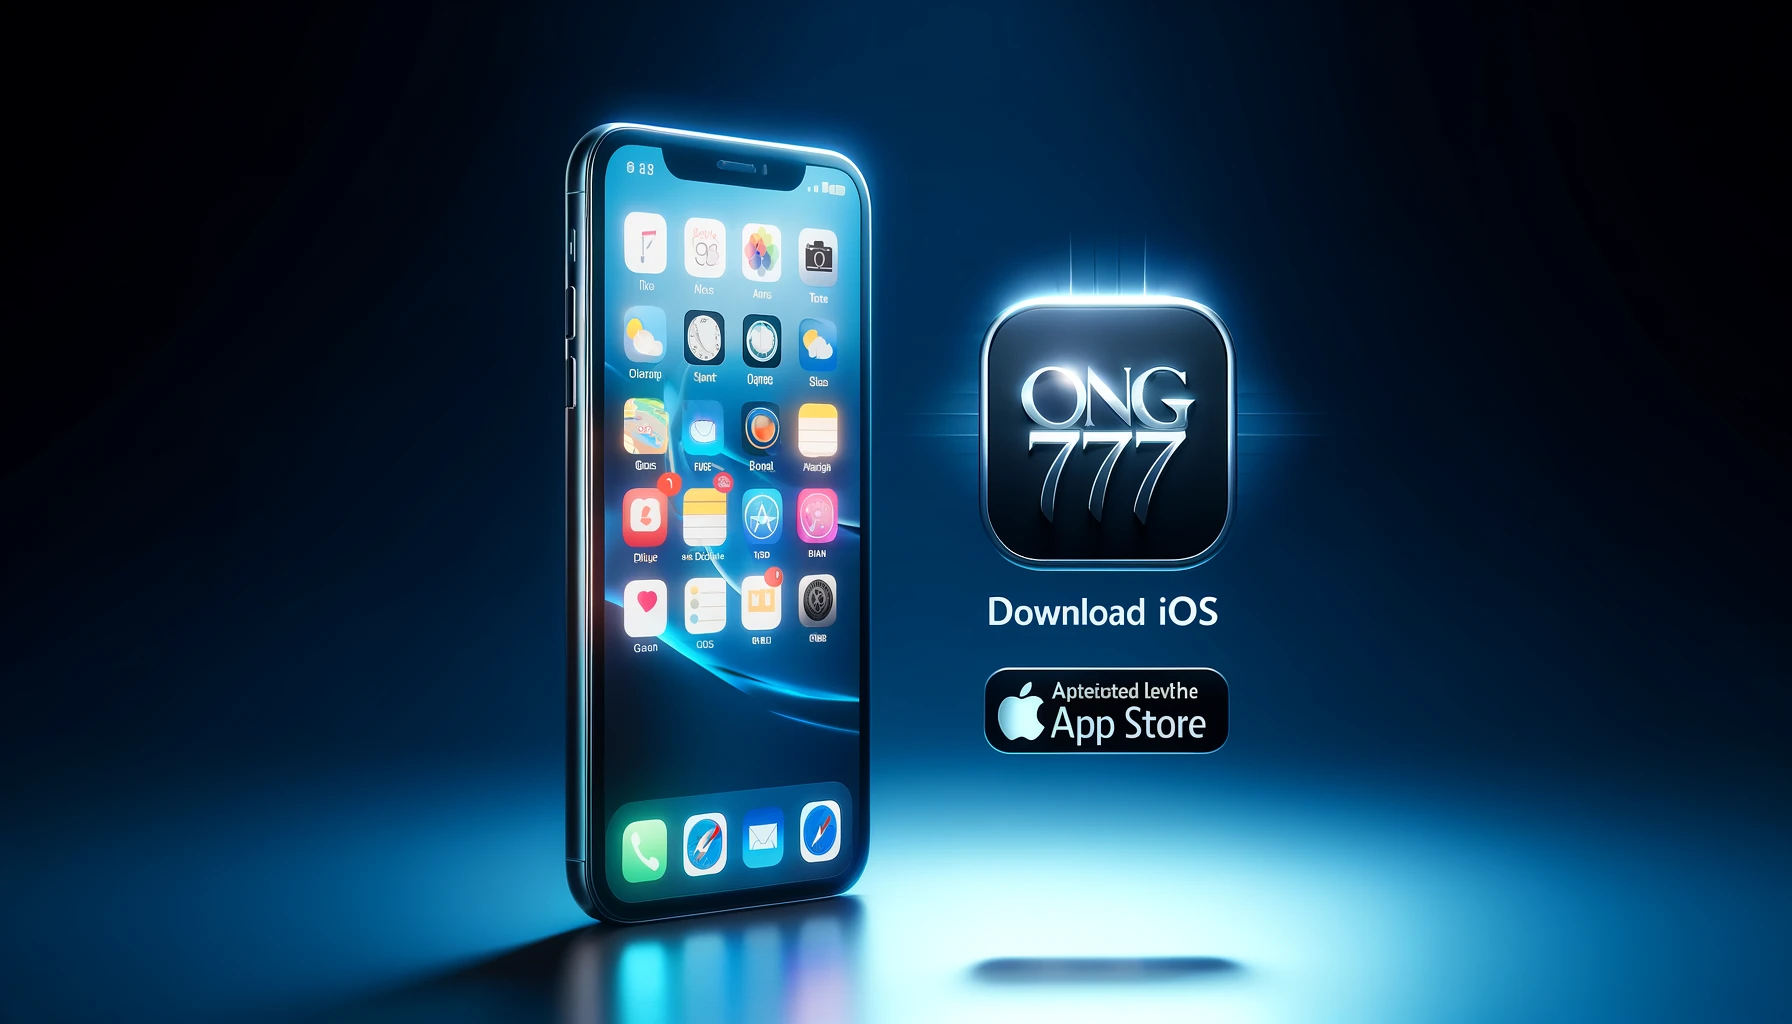 Ong777 Download iOS: Your Ultimate Guide